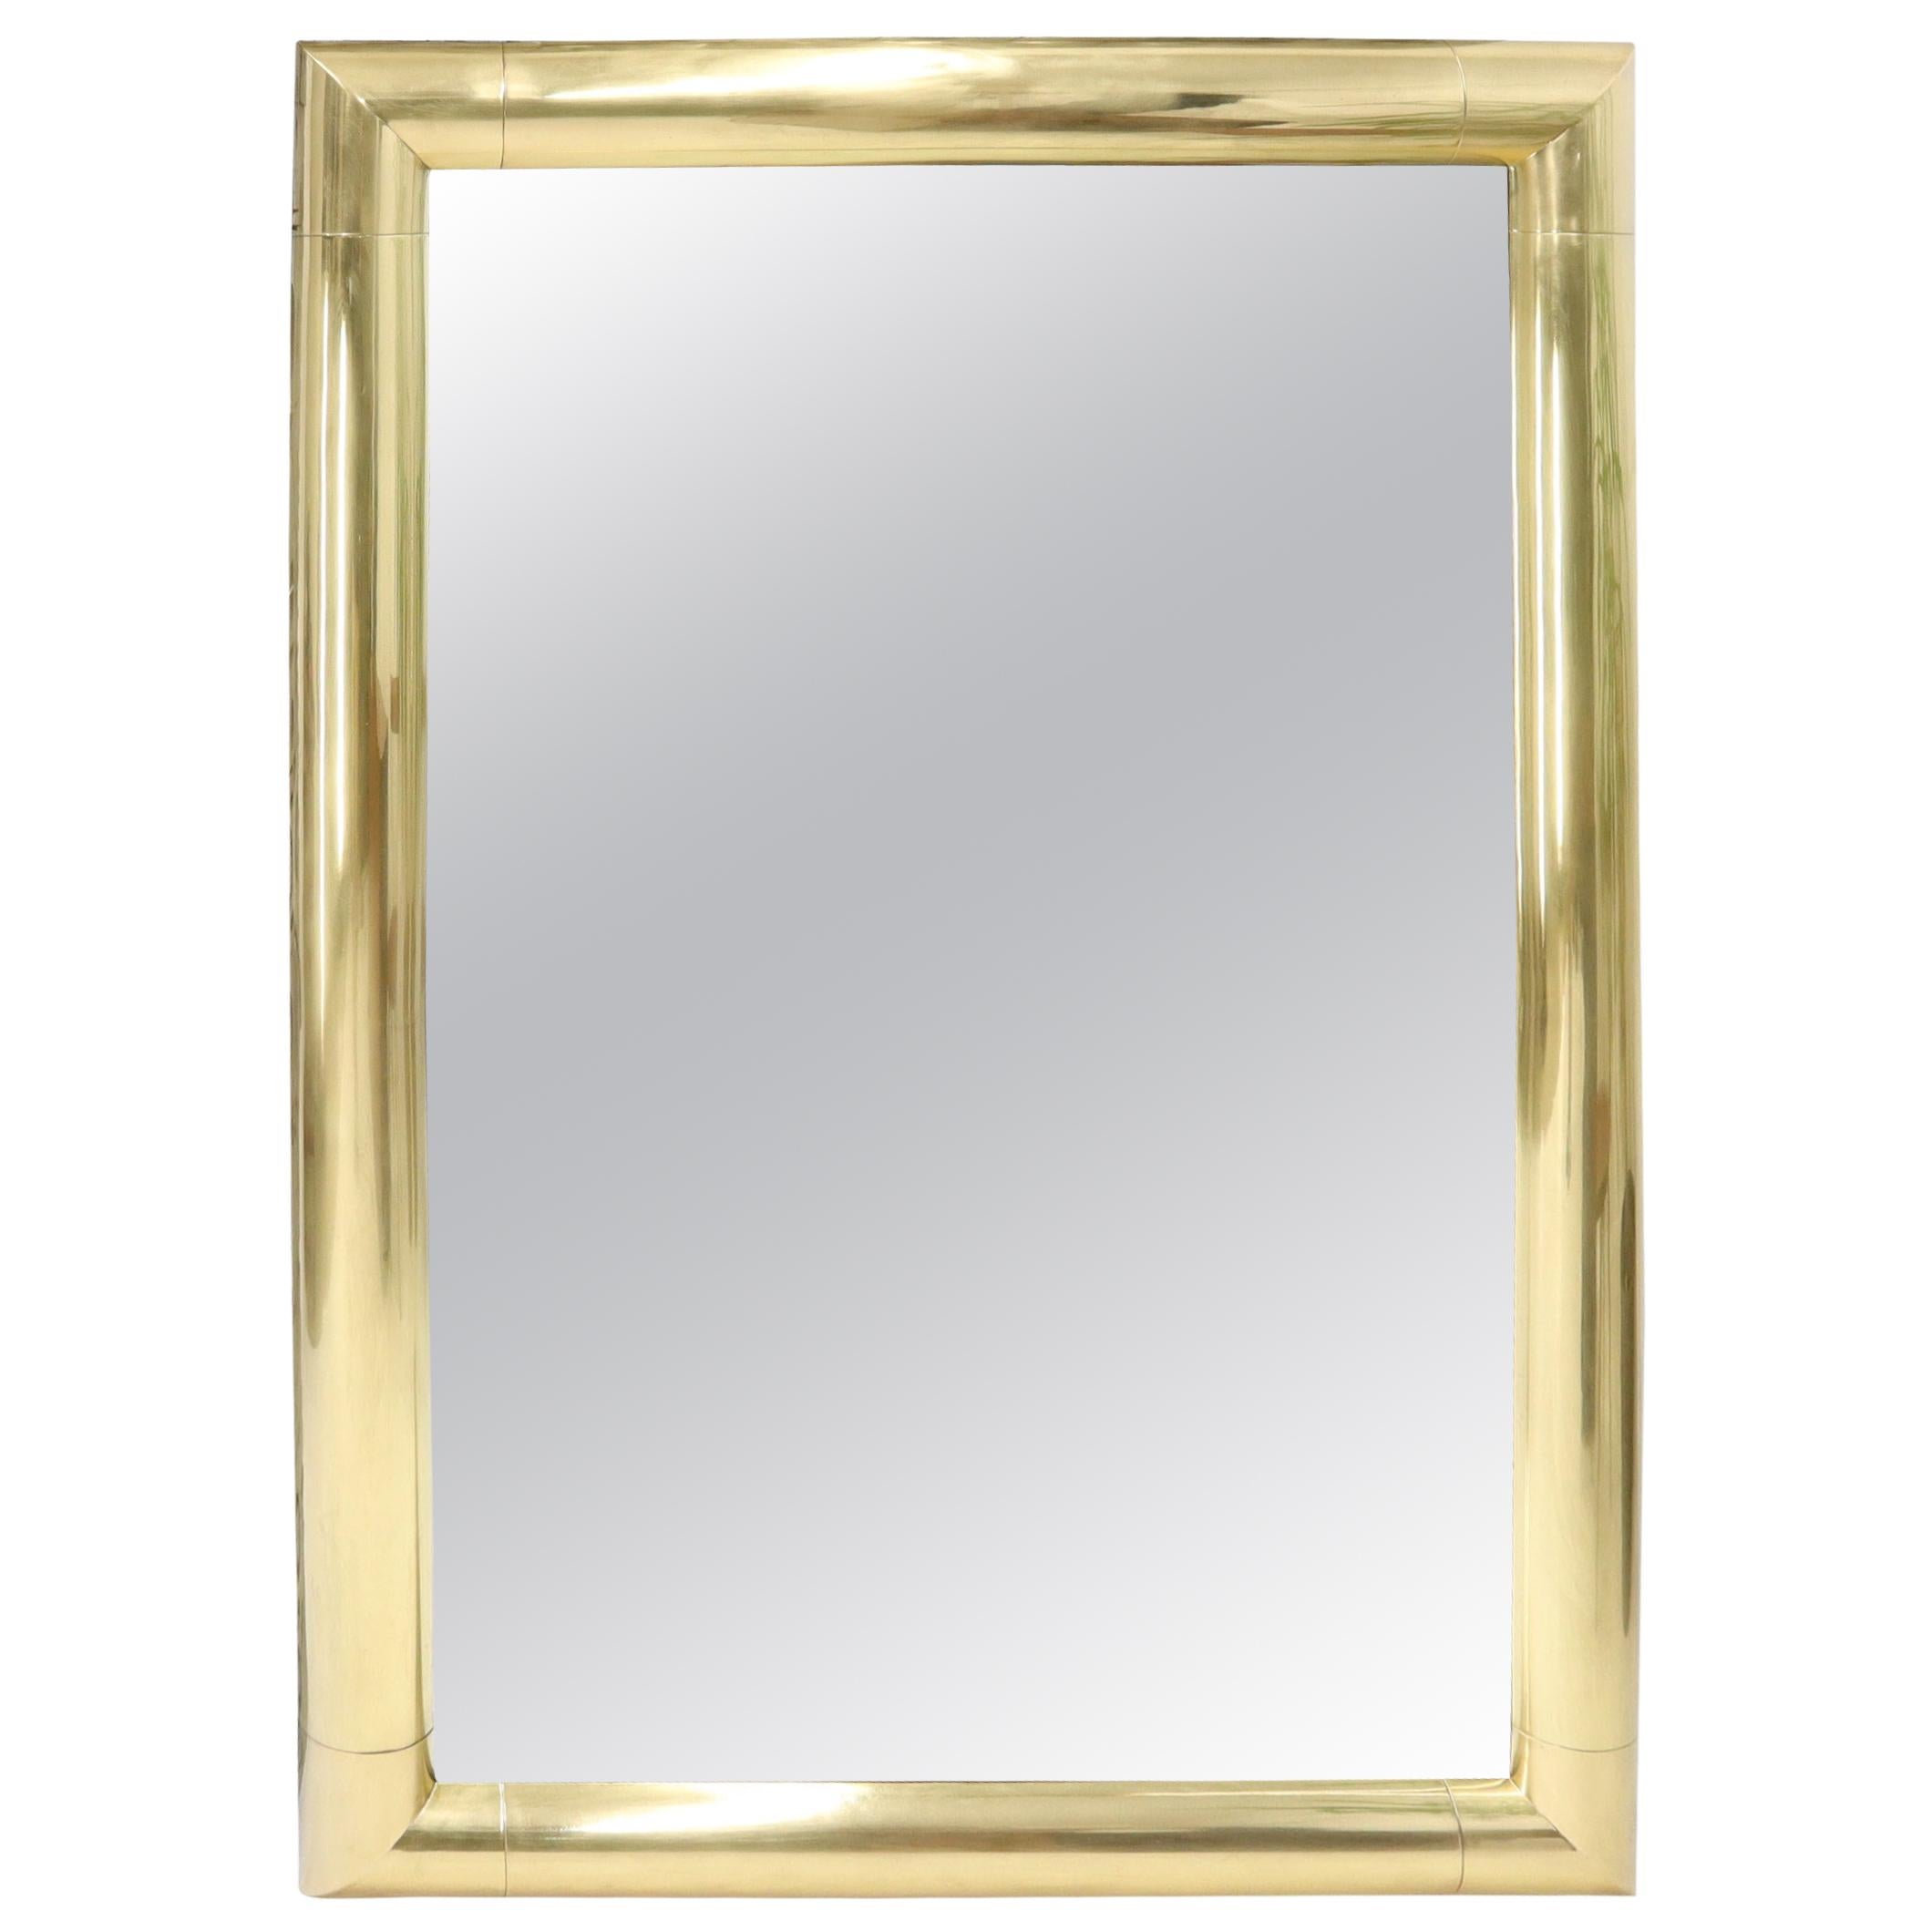 Large Solid Brass Half Round Profile Frame Rectangular Wall Mirror For Sale